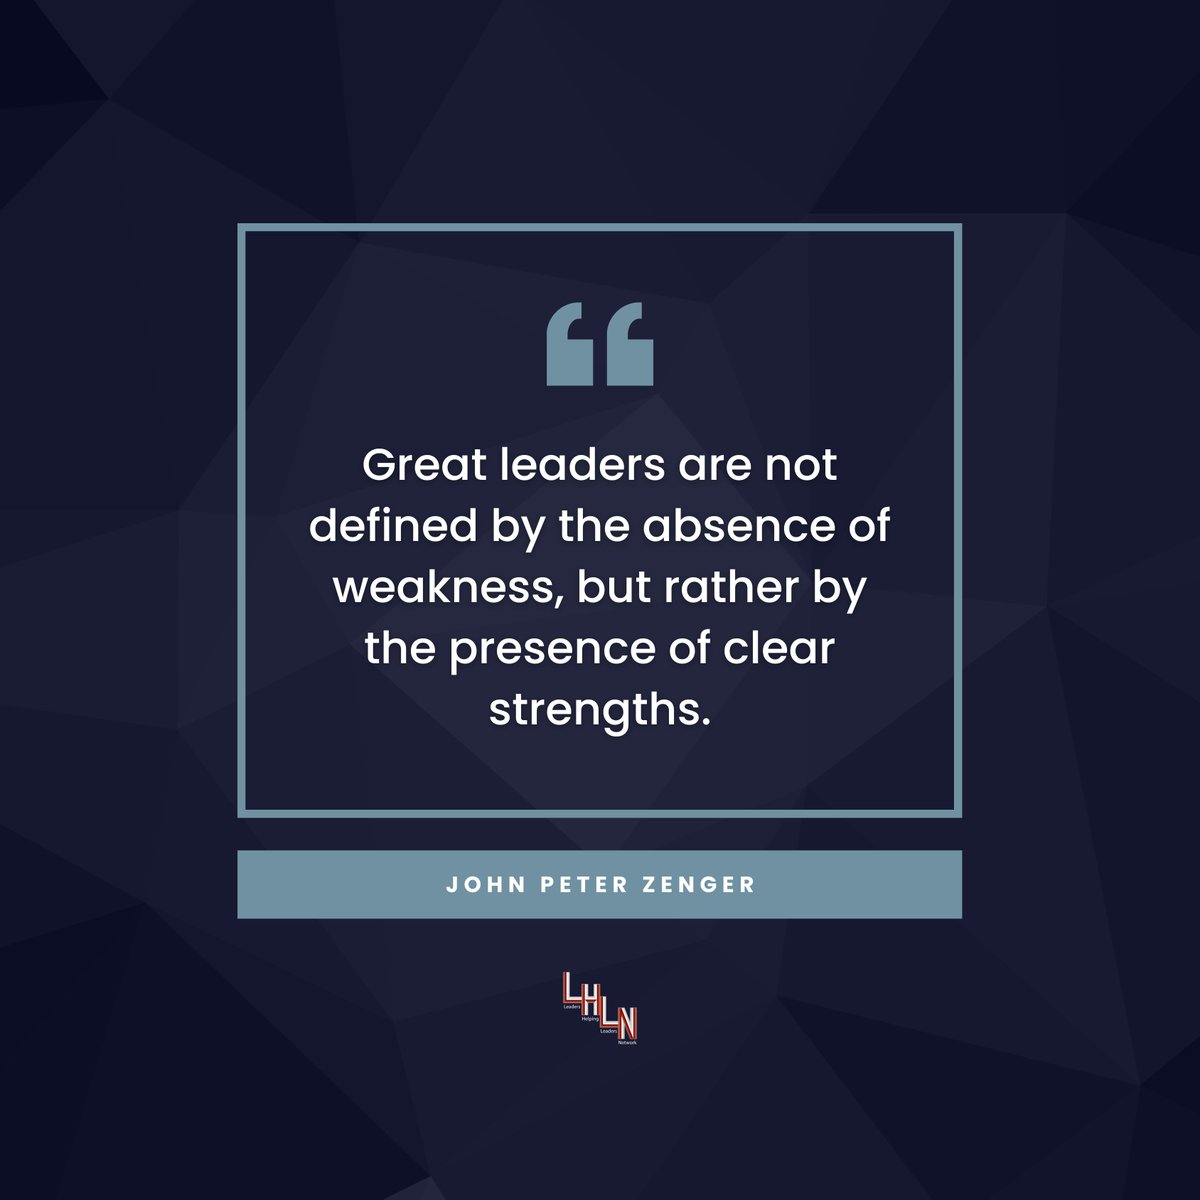 #quote #quoteoftheday #dailyquote #leaders #leadership #greatleaders #leader #strength #strengths #leadershipquote